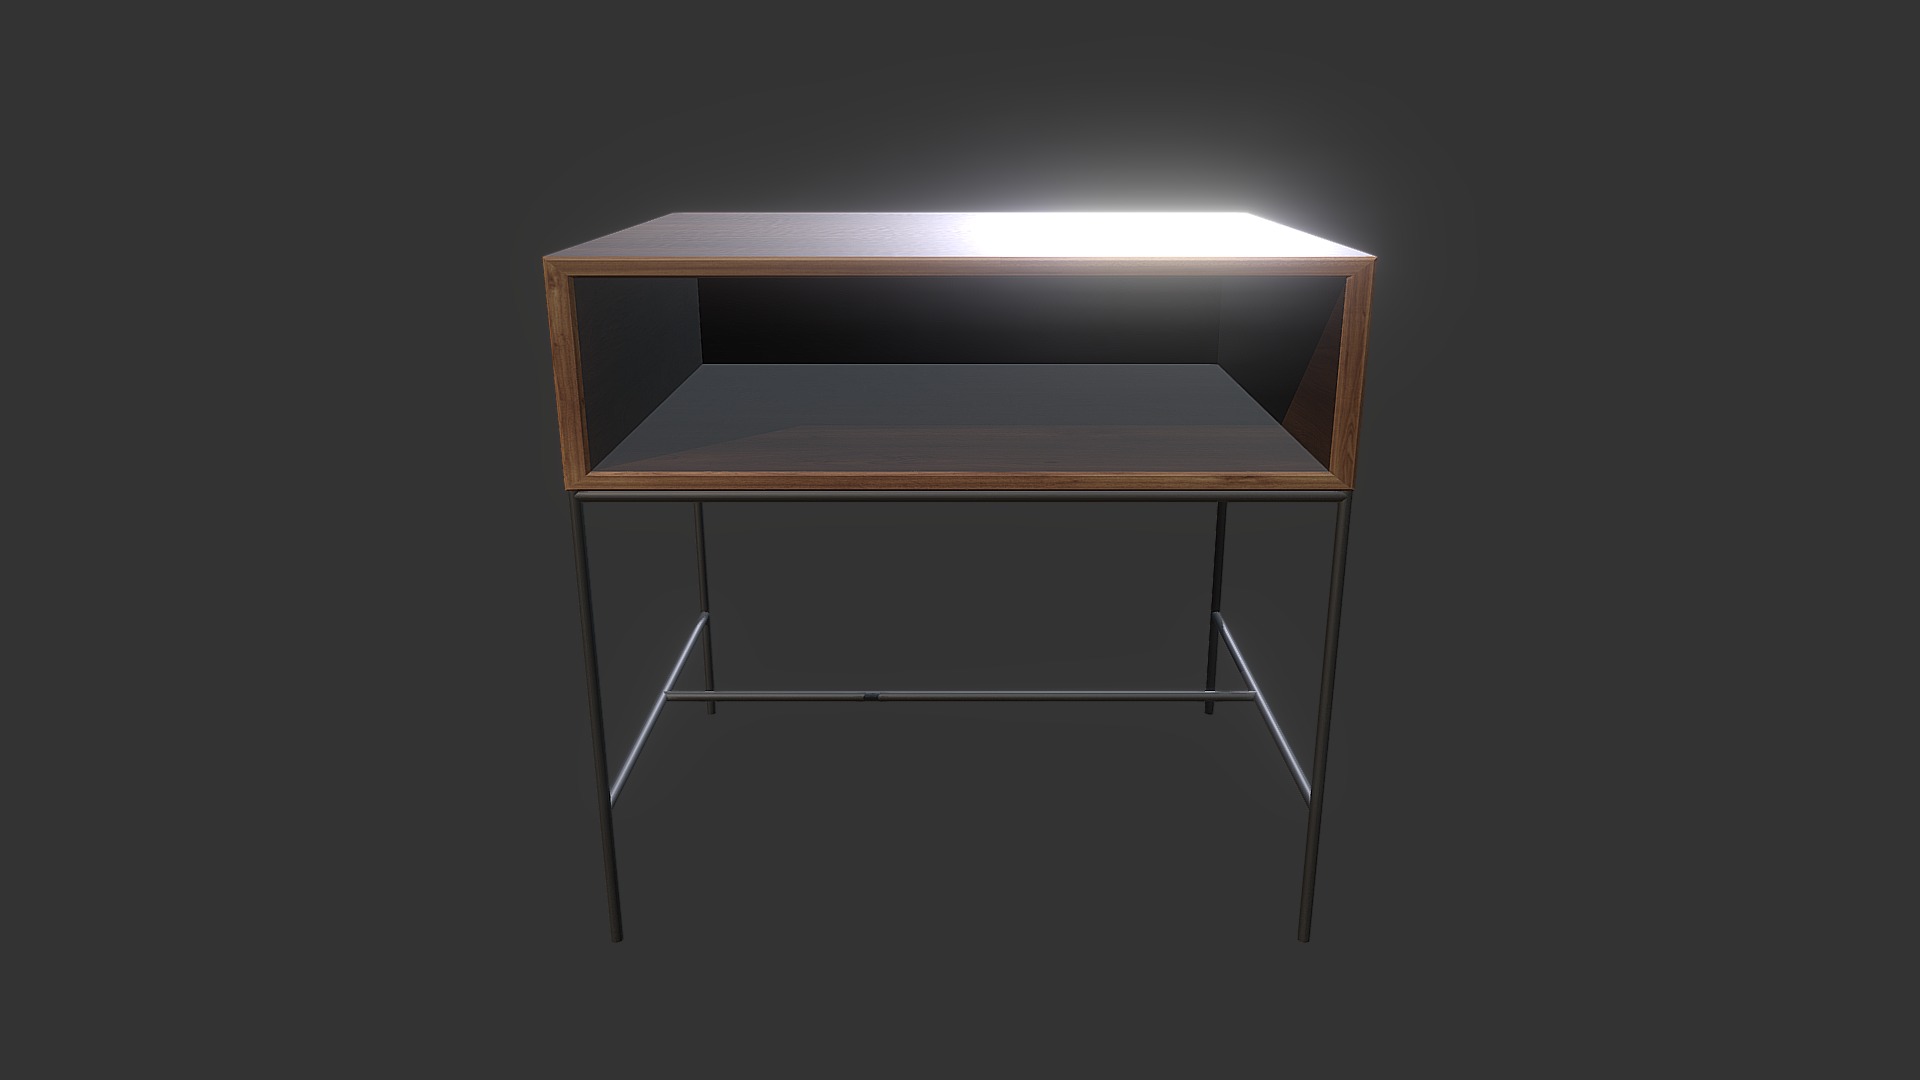 3D model Drawer 2 - This is a 3D model of the Drawer 2. The 3D model is about a wooden table with a light on top.